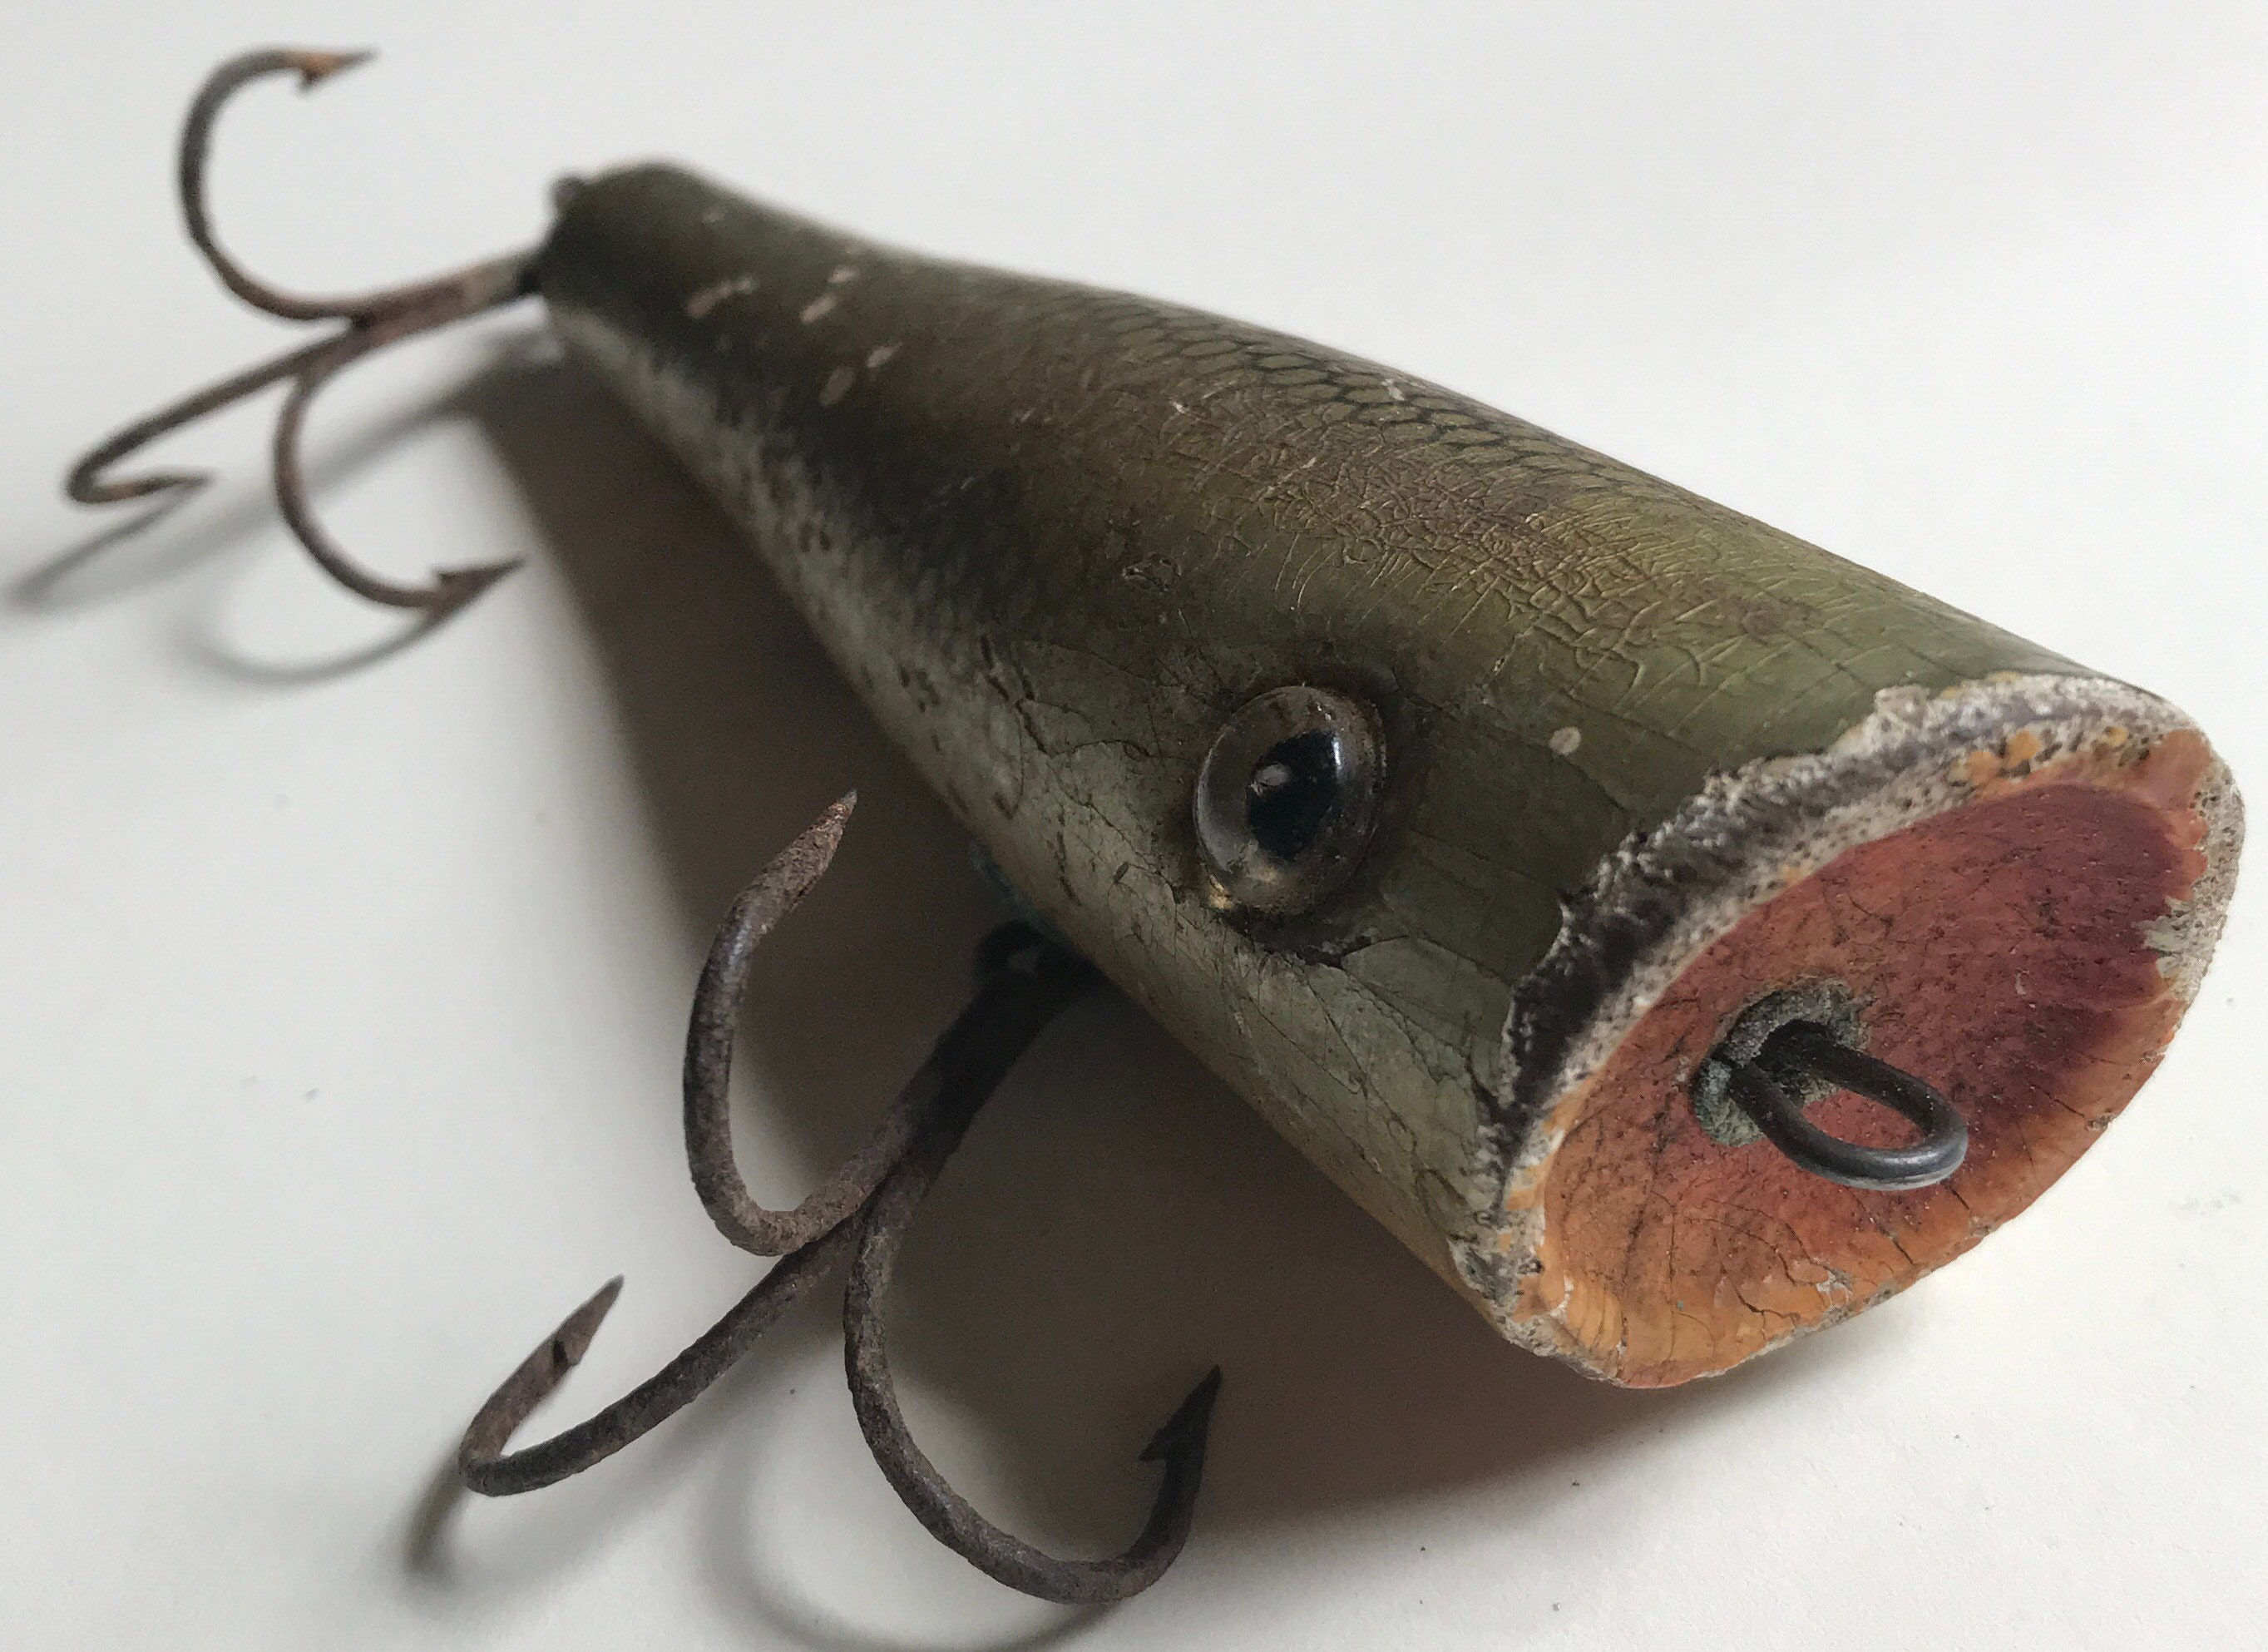 Snook Bait Company Saltwater Fishing Lure 1949-1952. Antique Tackle. NY.  Rare. Missing 1 Glass Eye. Has 1 Treble Hook. Original Paint. FS. -   Denmark